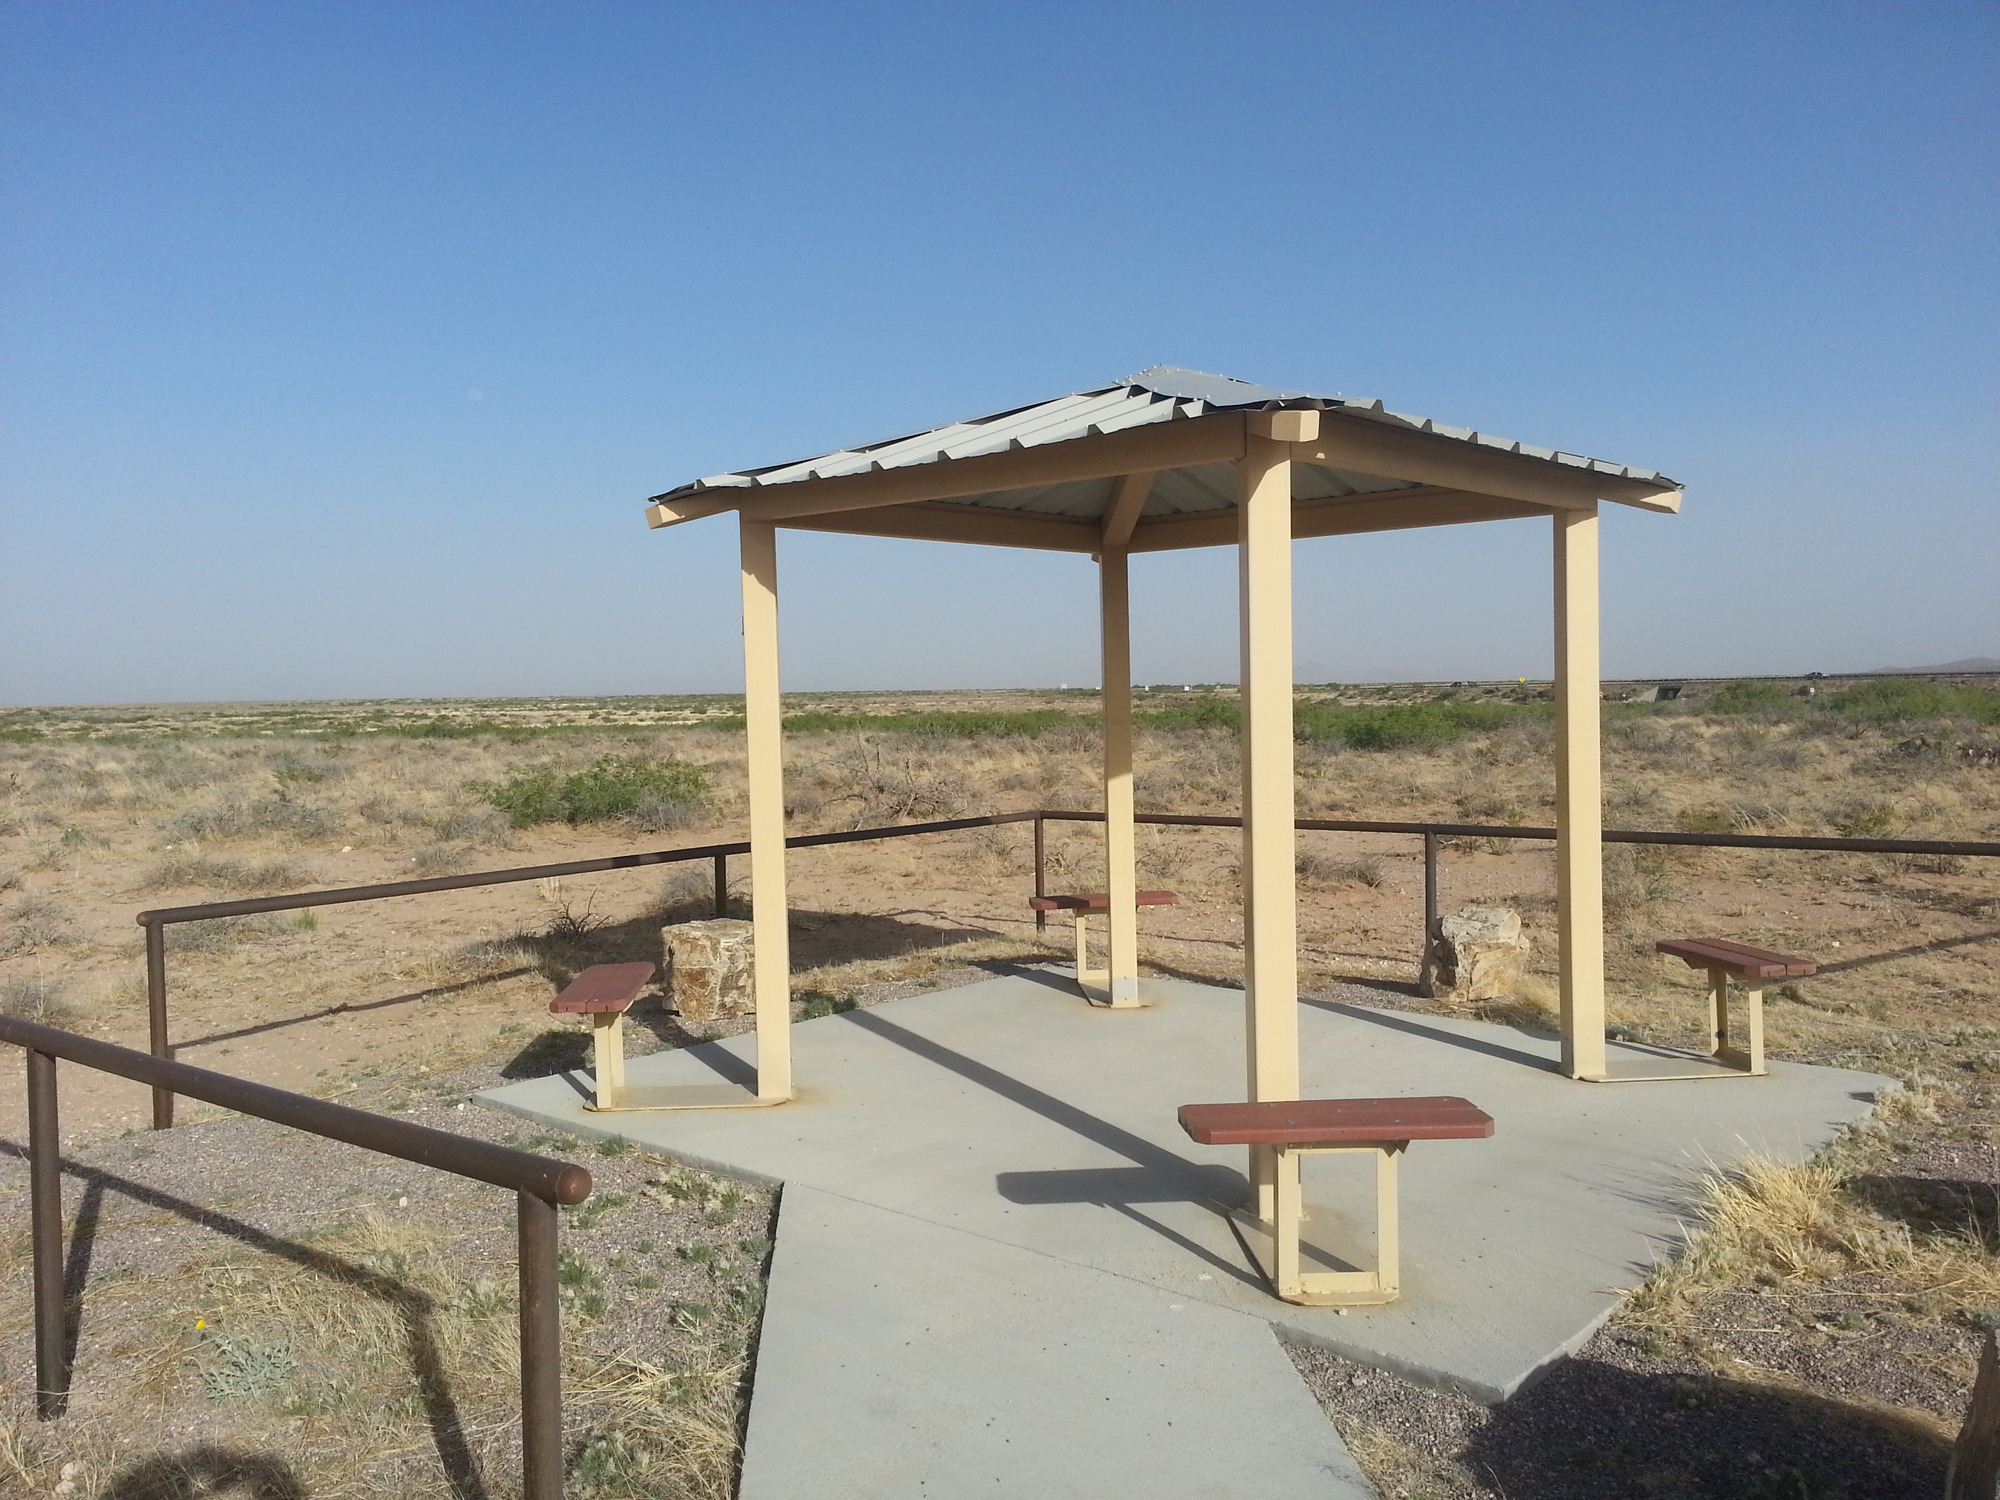 A sheltered rest area at the Jornada Del Muerto along the El Camino Real de Tierra Adentro National Historic Trail outside of Truth or Consequences, NM